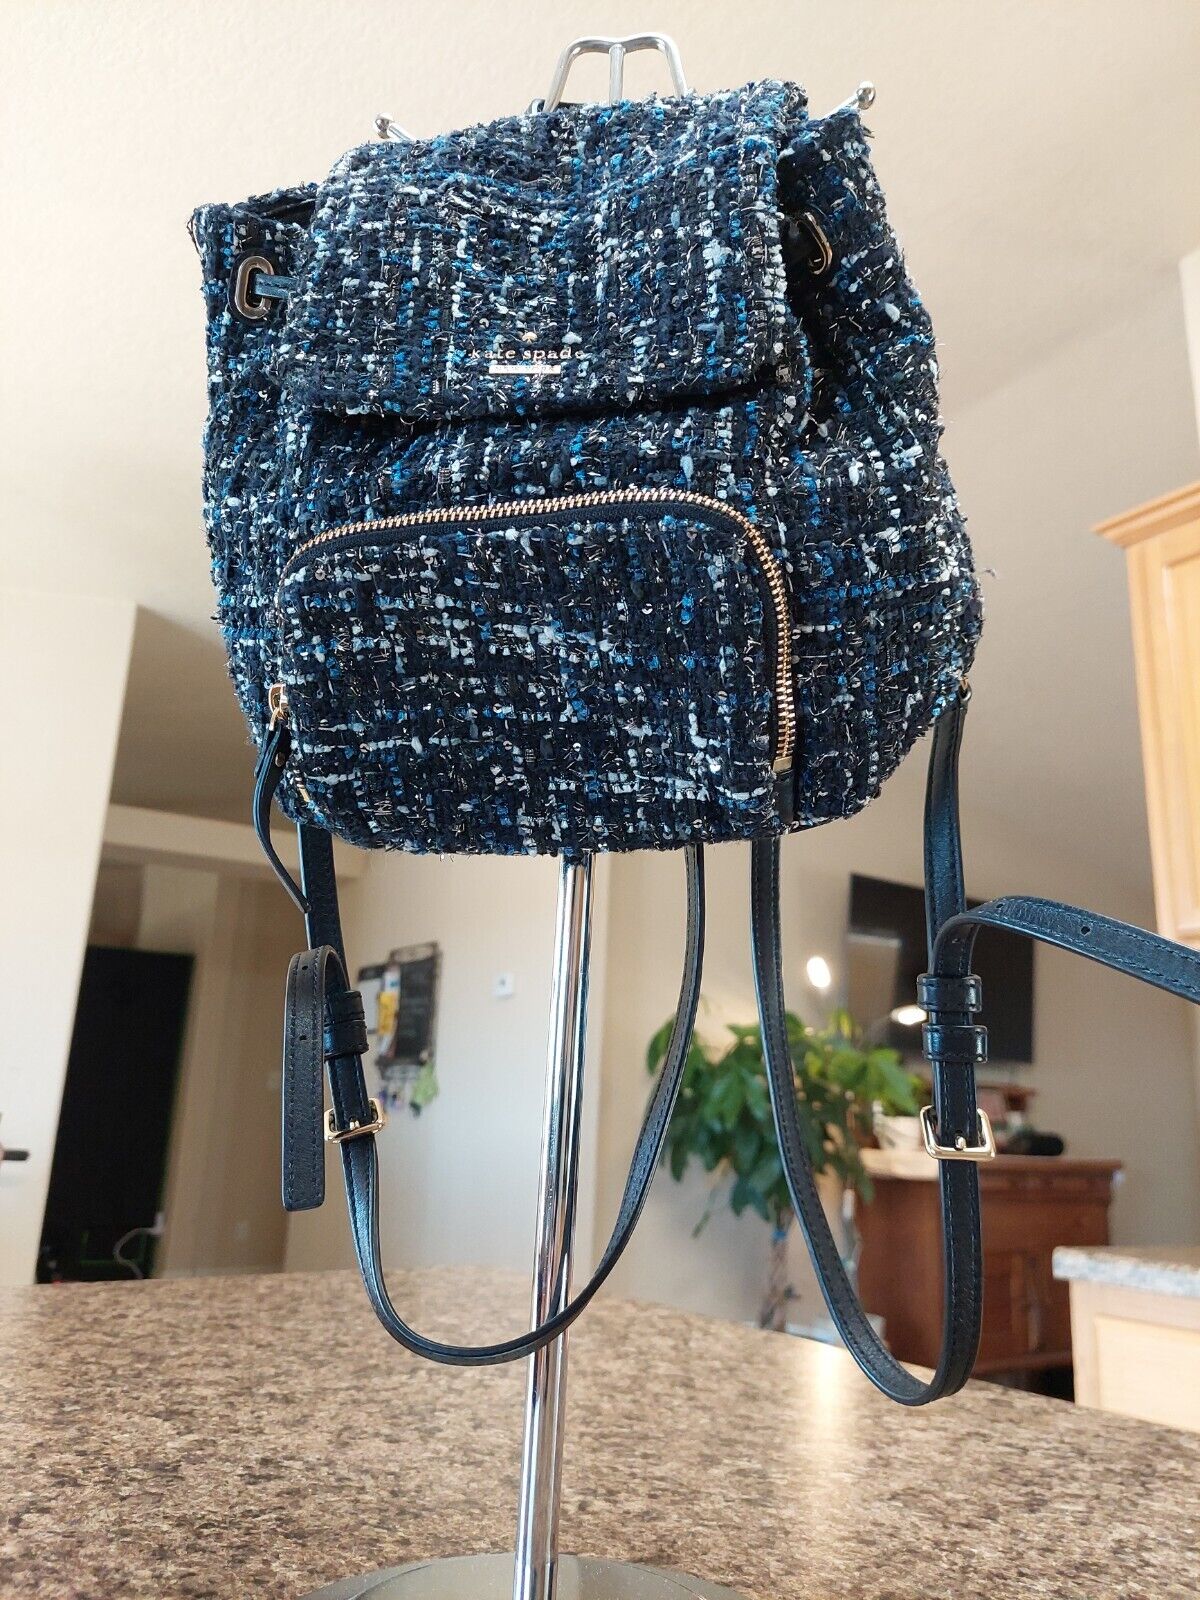 KATE SPADE NY SMALL BACKPACK BAG BLACK & BLUE TWEED BOUCLE SEQUINS BLACK LEATHER